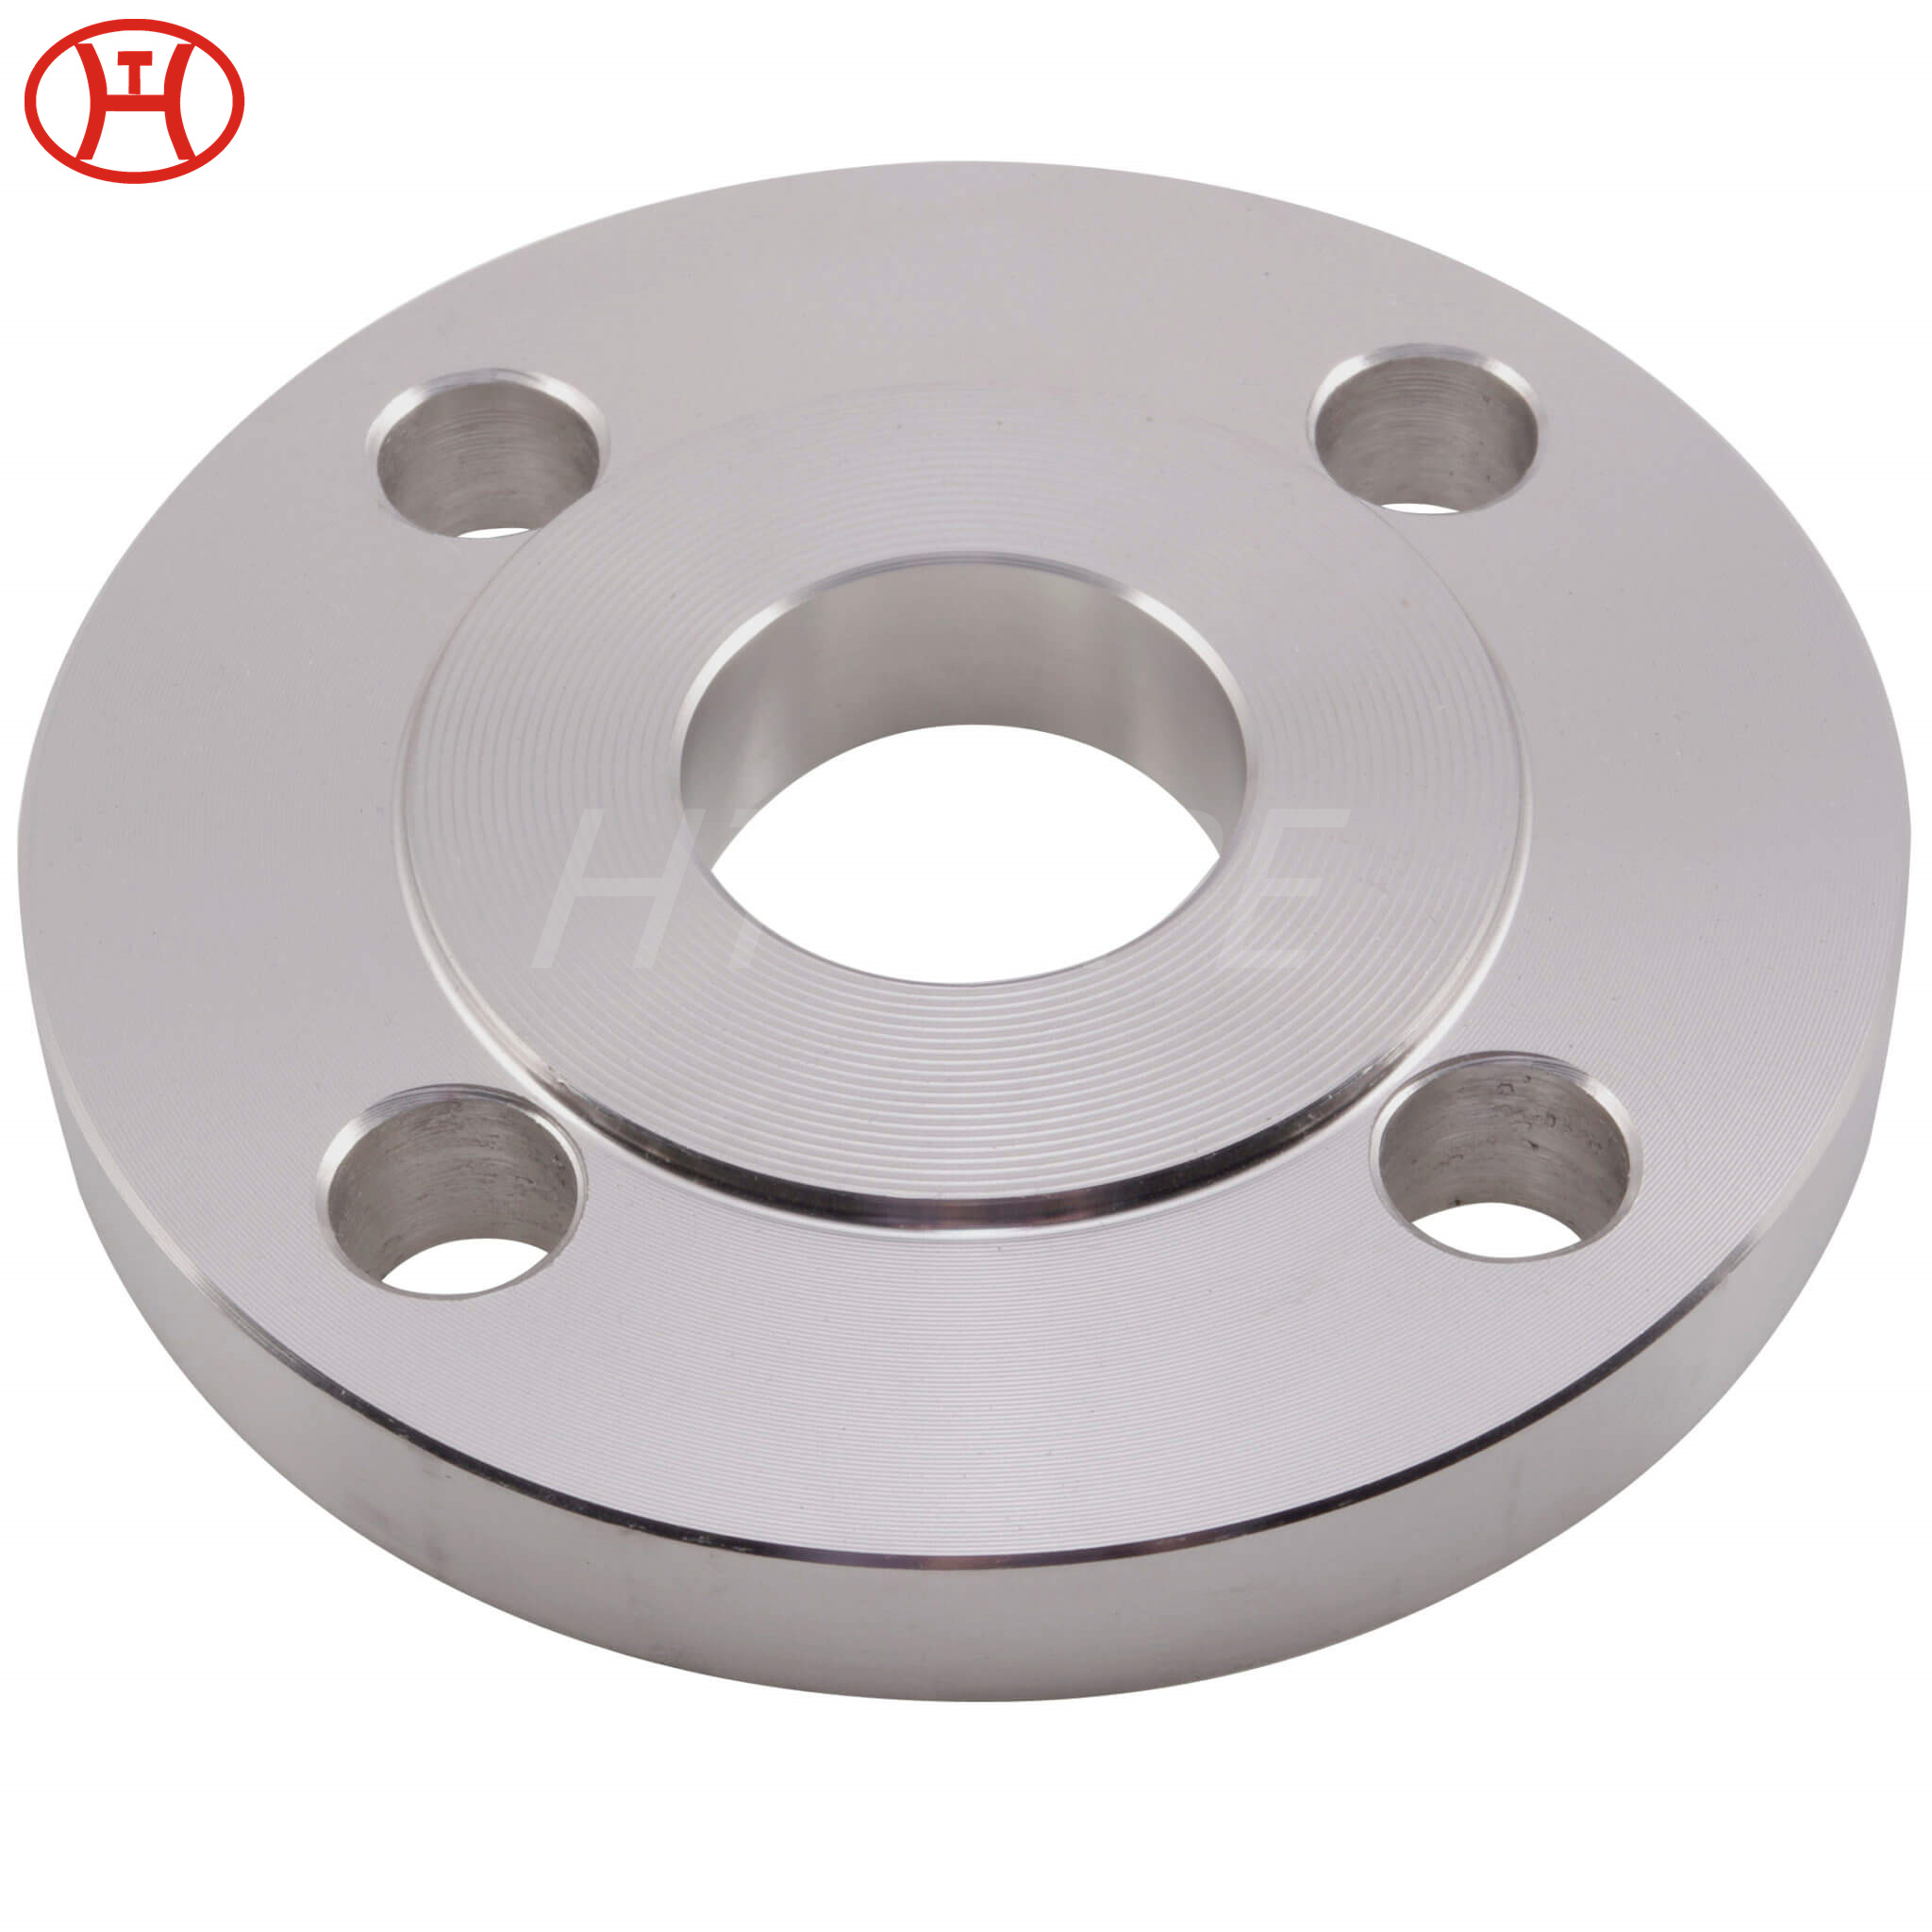 n08810 nickel alloy incoloy 800h flange